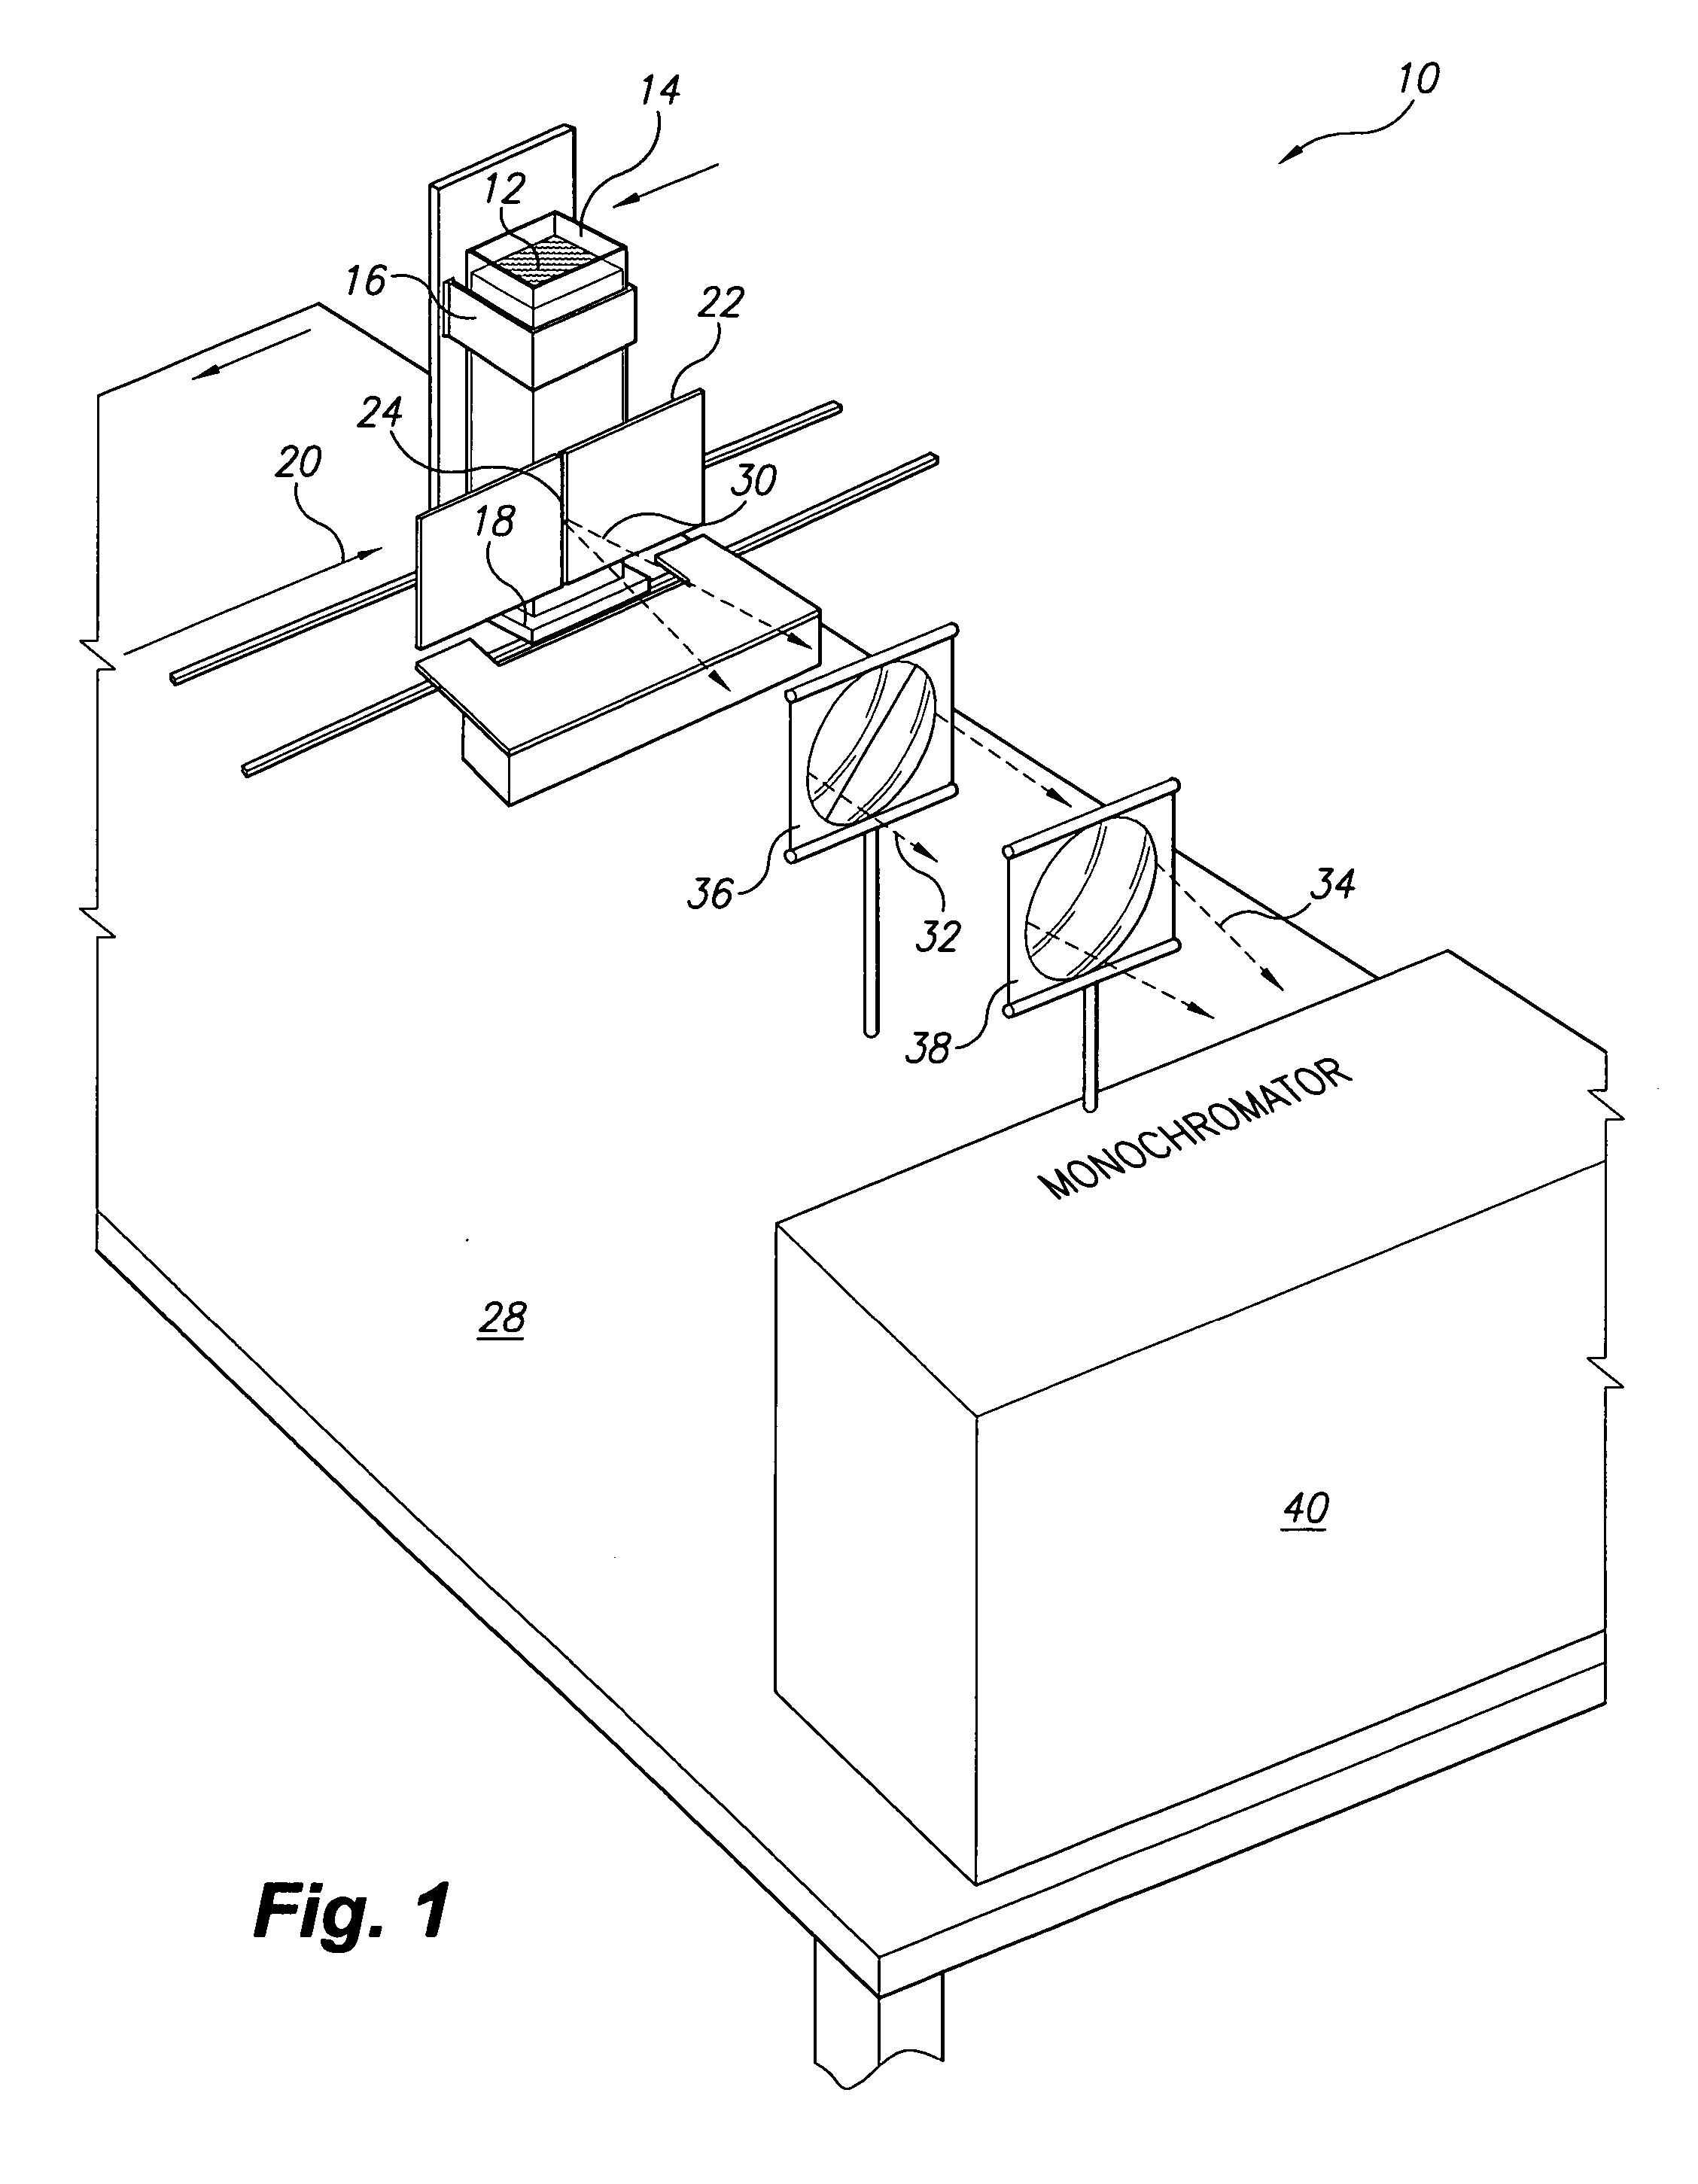 Apparatus and method for measuring concentrations of fuel mixtures using depth-resolved laser-induced fluorescence